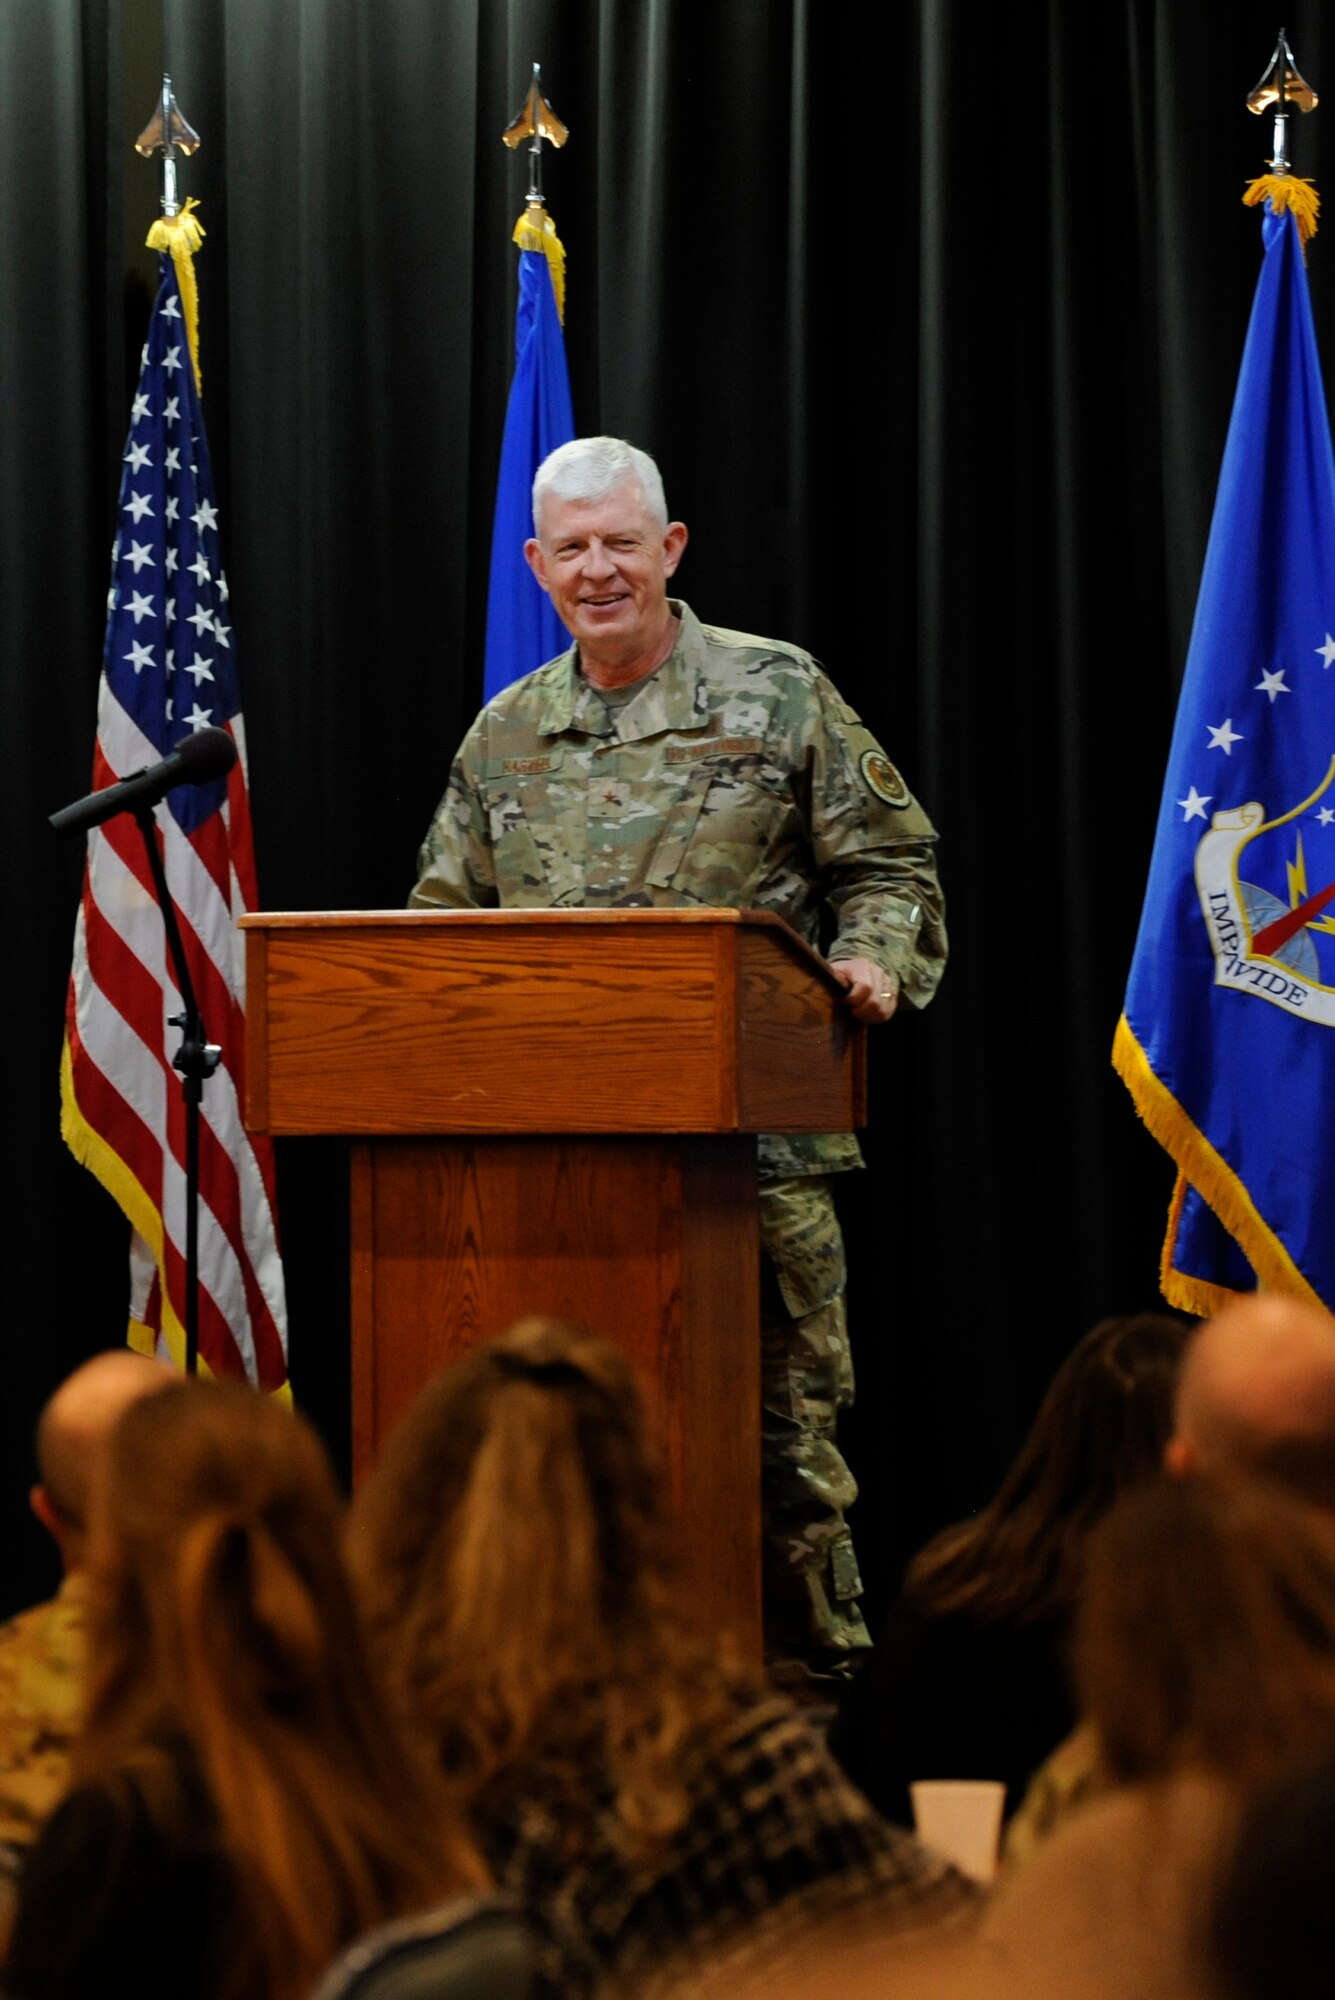 Chaplain (Brig. Gen.) Ron Harvell, Air Force Deputy Chief of Chaplains, speaks during the National Prayer Luncheon May 1, 2019 at F. E. Warren Air Force Base, Wyoming. Harvell stated people who practice their faith with others are six times less likely to commit suicide. (U.S. Air Force photo by Tech. Sgt. Ashley Manz)